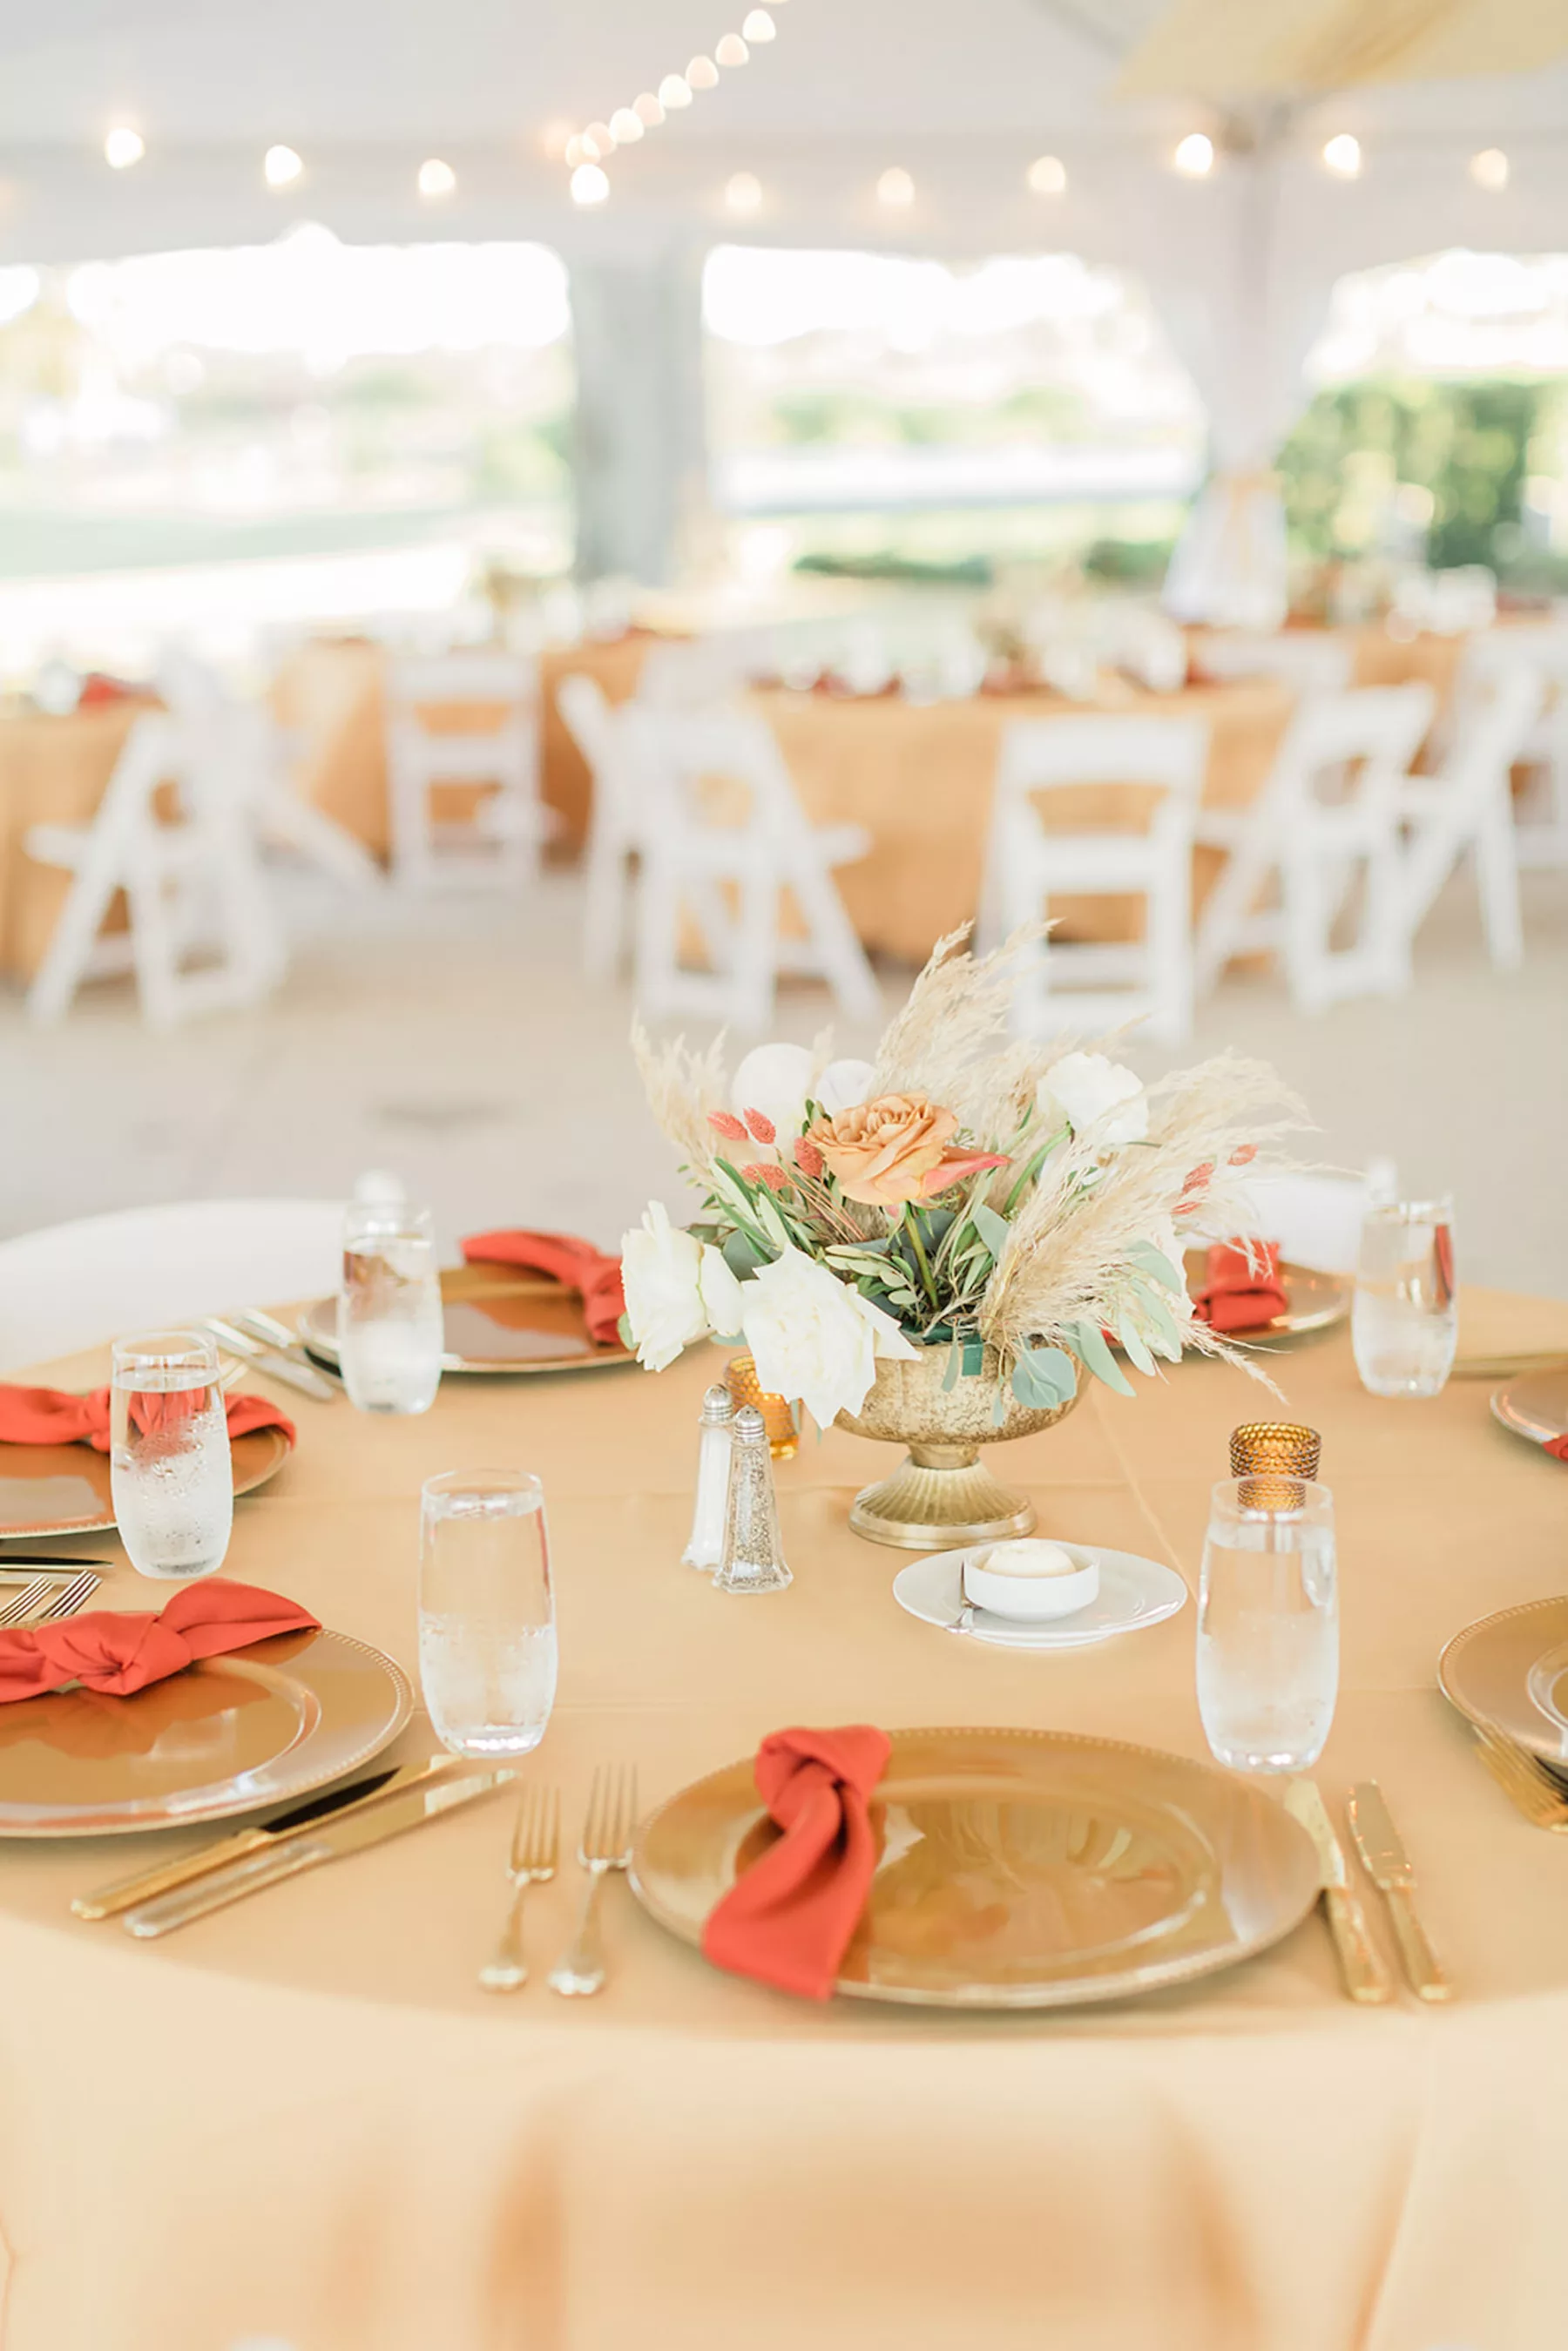 Boho Outdoor Fall Wedding Reception Tablescape Inspiration | Neutral Peach Table Cloth and Burnt Orange Napkins | White and Orange Roses, Pampas Grass, and Greenery Centerpiece Ideas